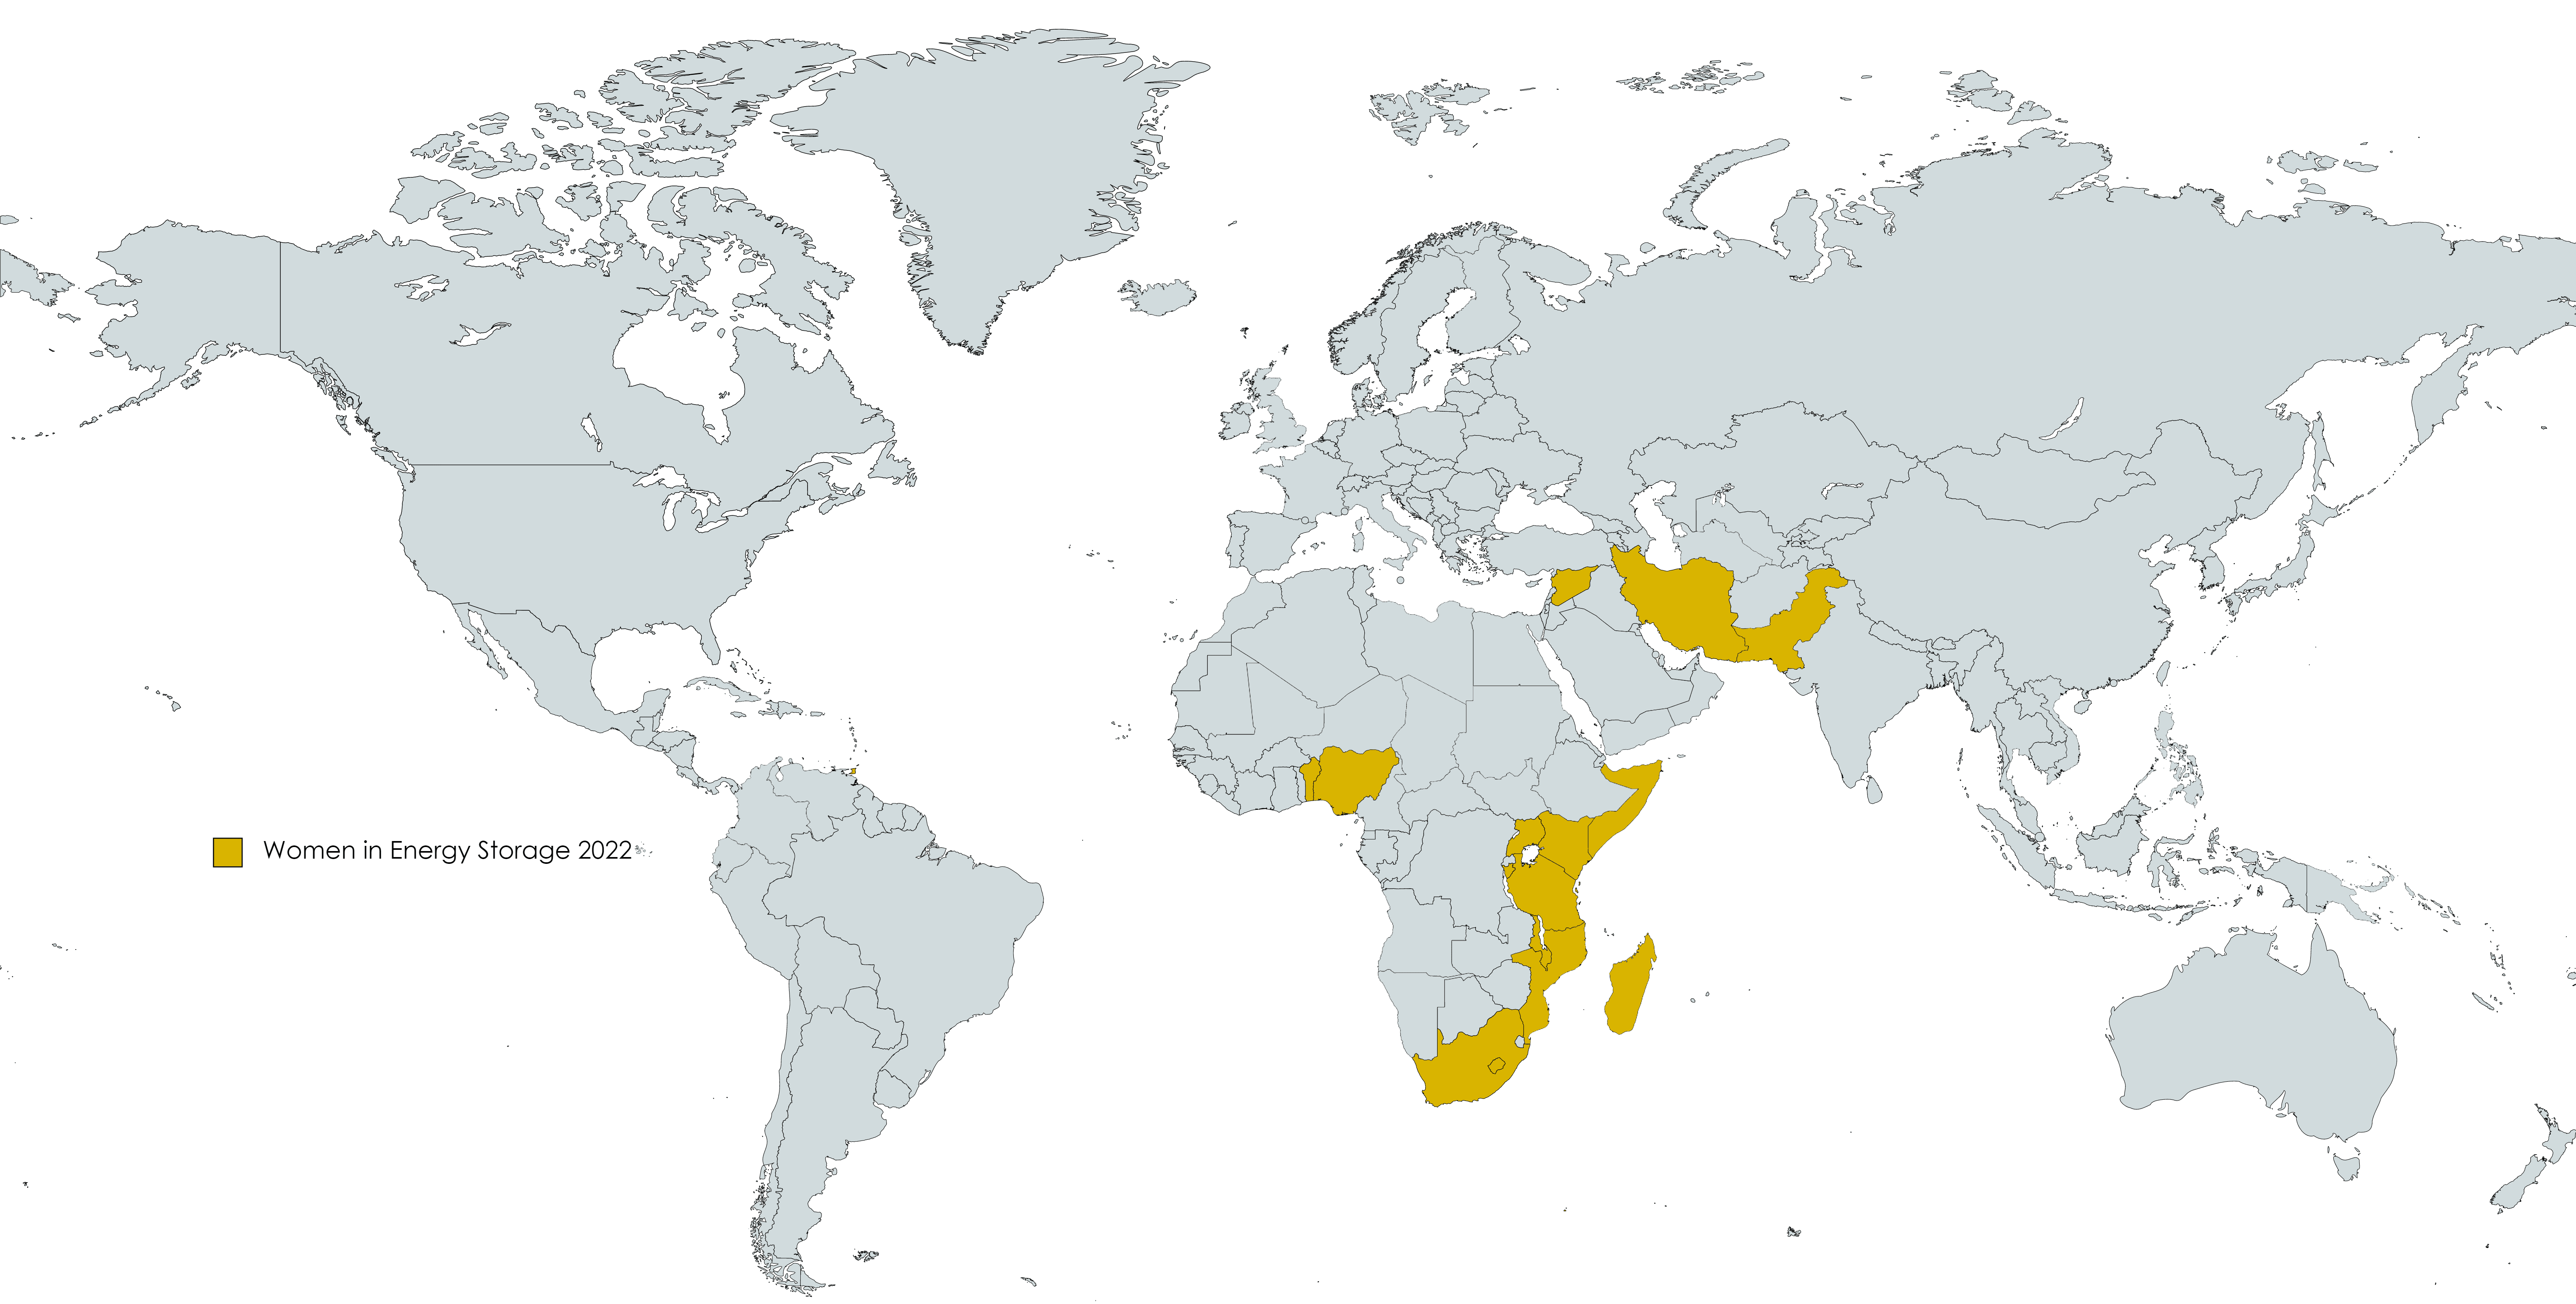 Map of the world with women in energy storage mentee countries highlighted in yellow